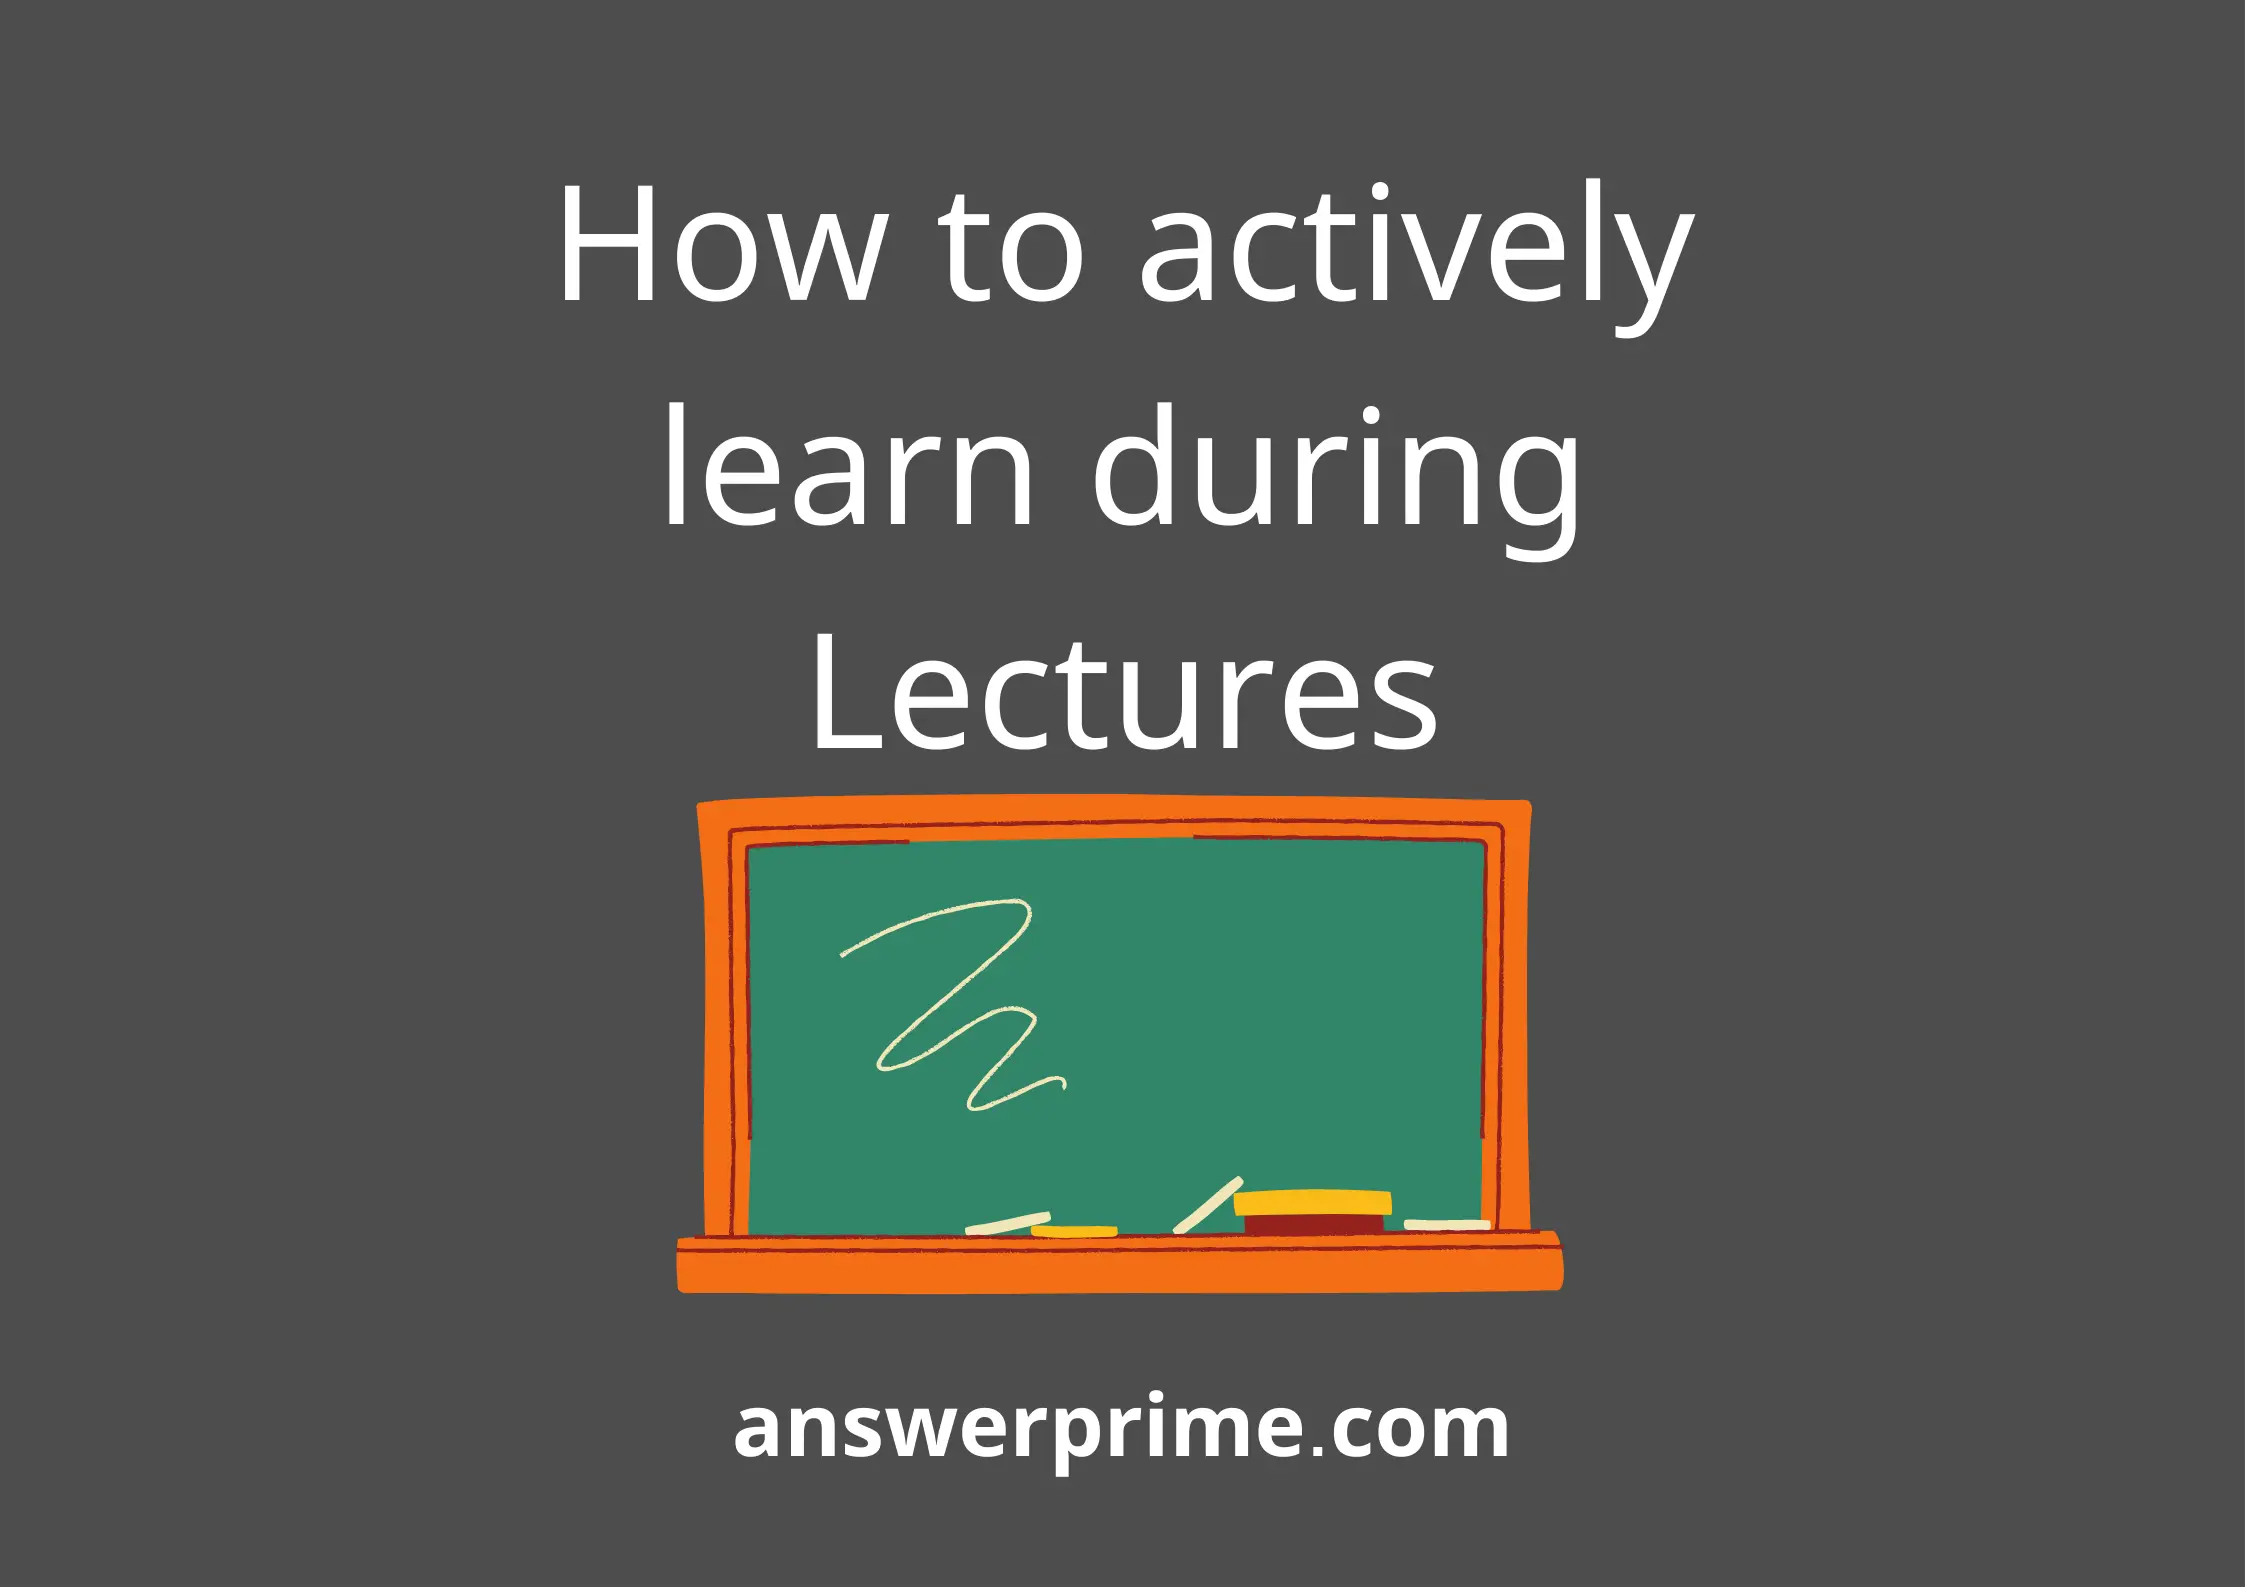 How to actively learn during Lectures